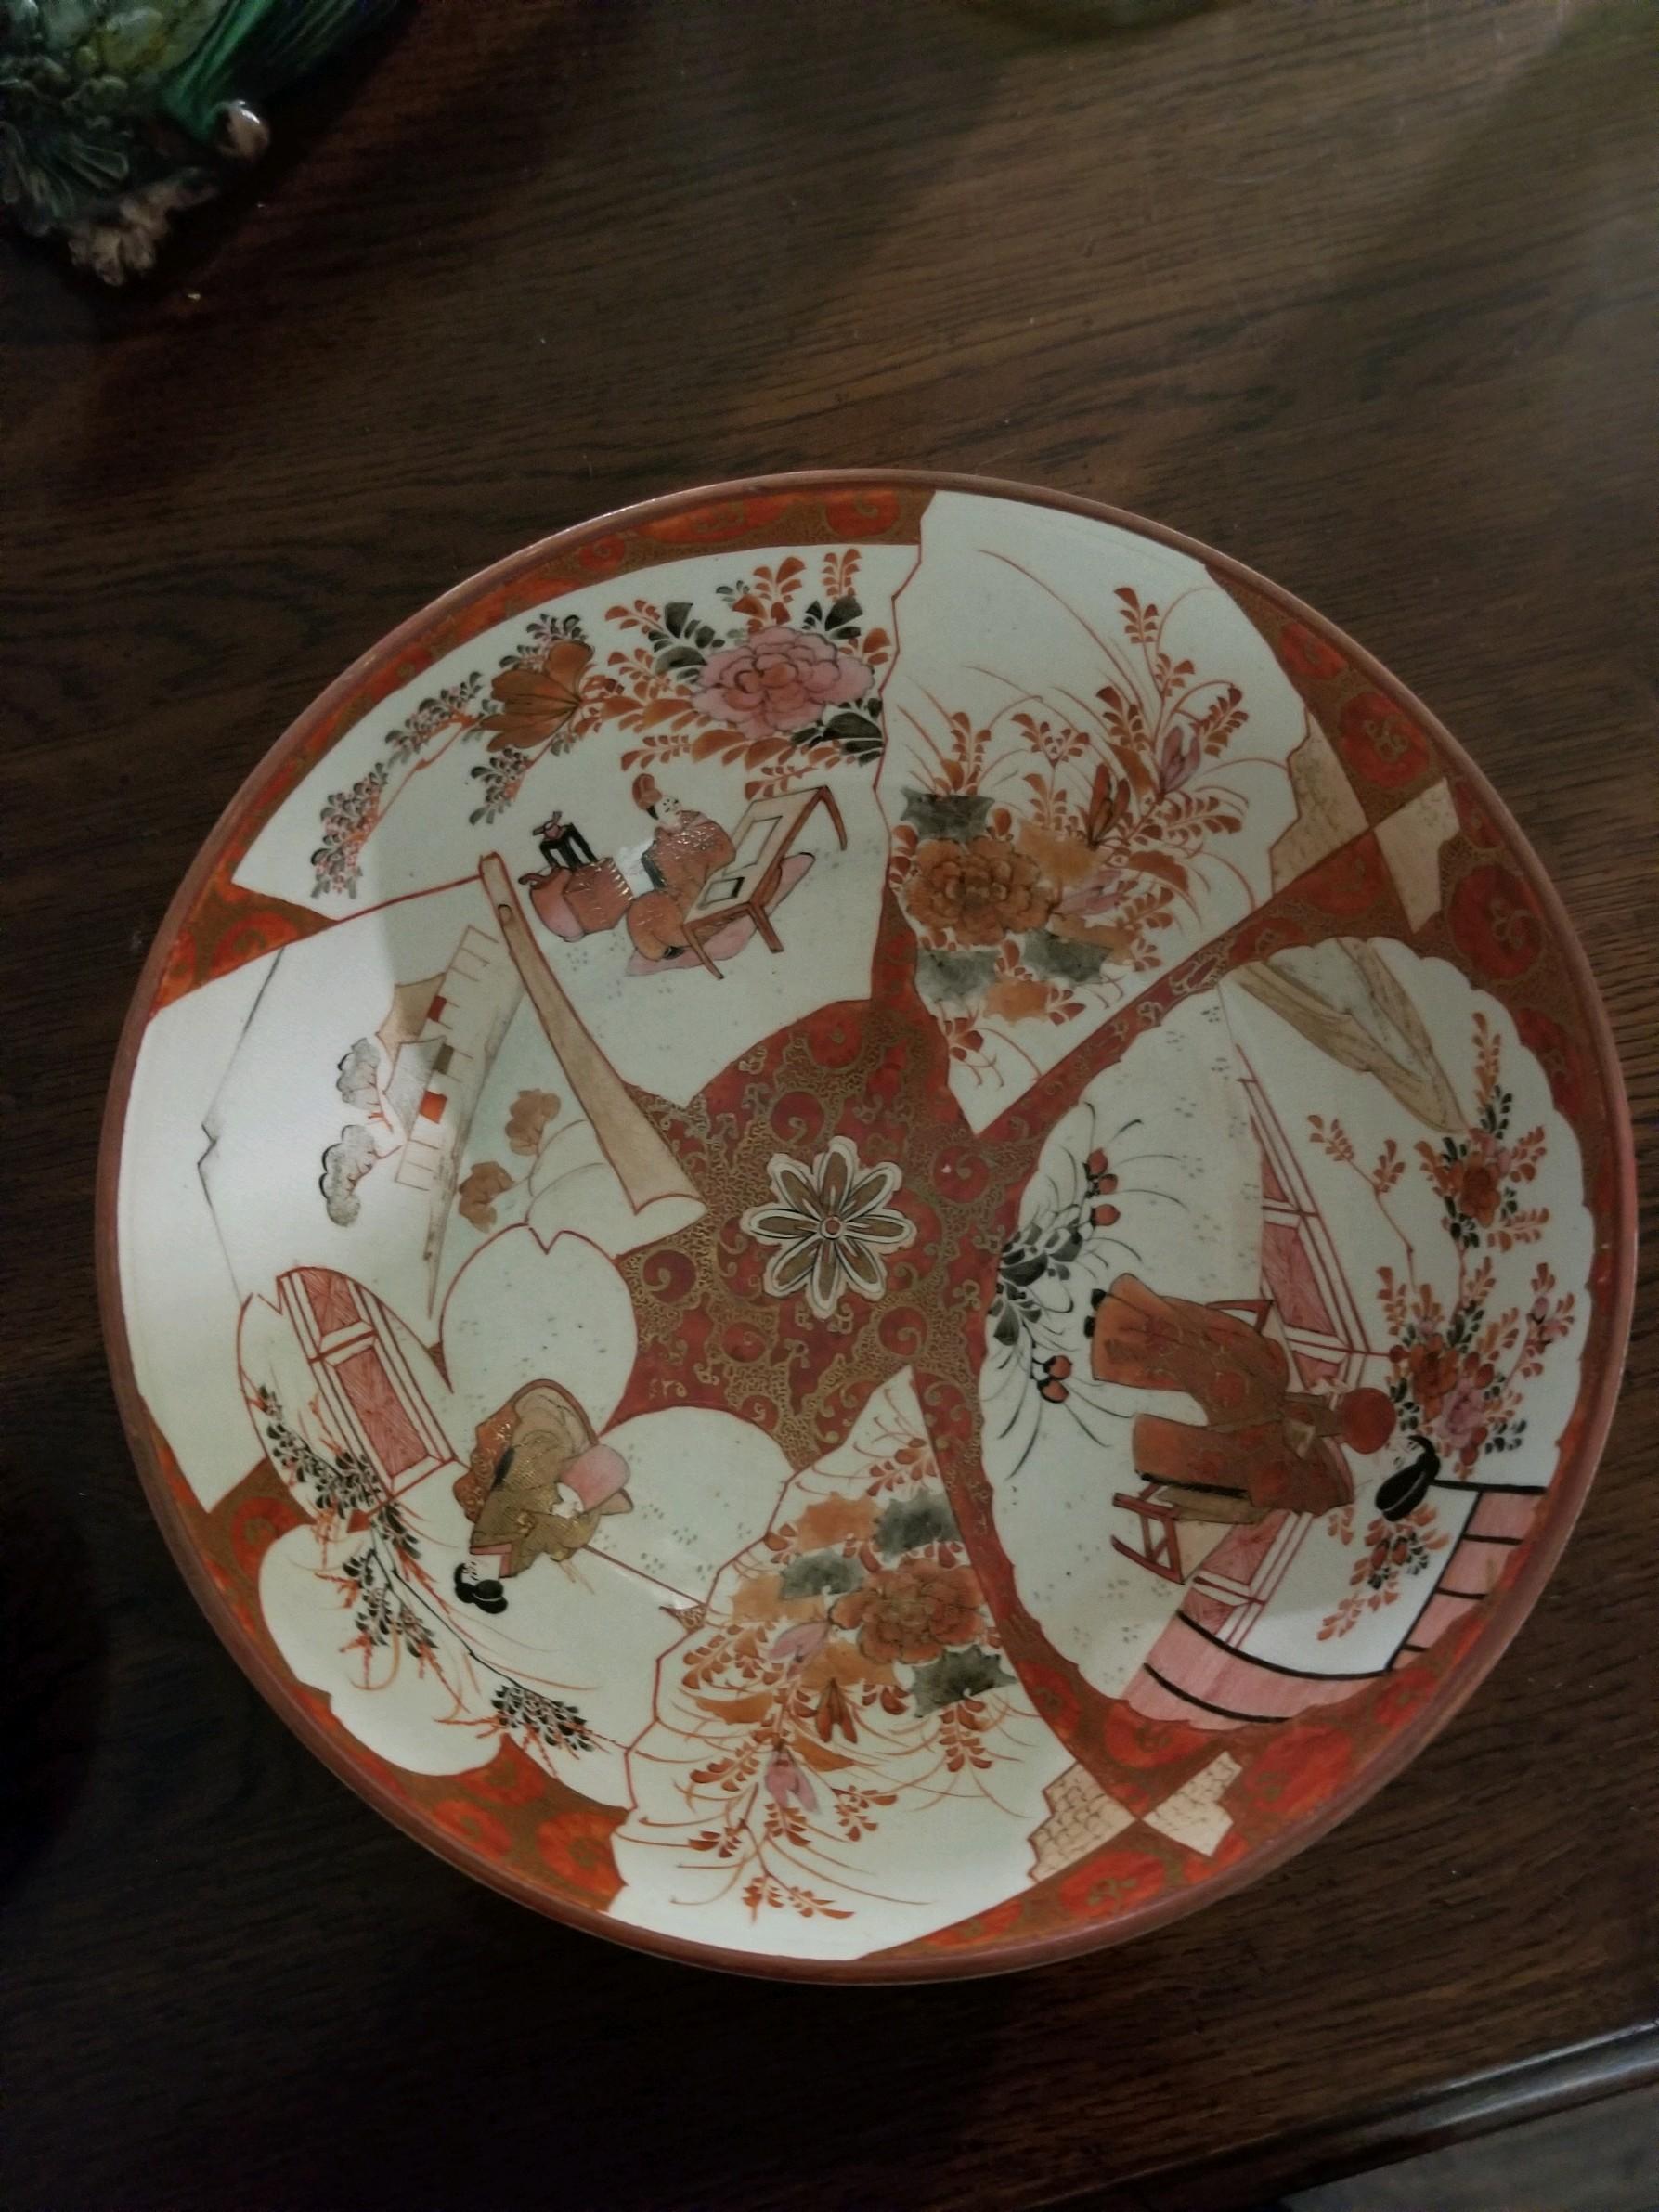 Wonderful and Classic Japanese Kutani Bowl in the proper color with the Classic butterfly pattern on the outside. Scenic and beautiful, it will stun on a cocktail table or on a lit pedestal. Place on a dining table as the center focal point. Many of